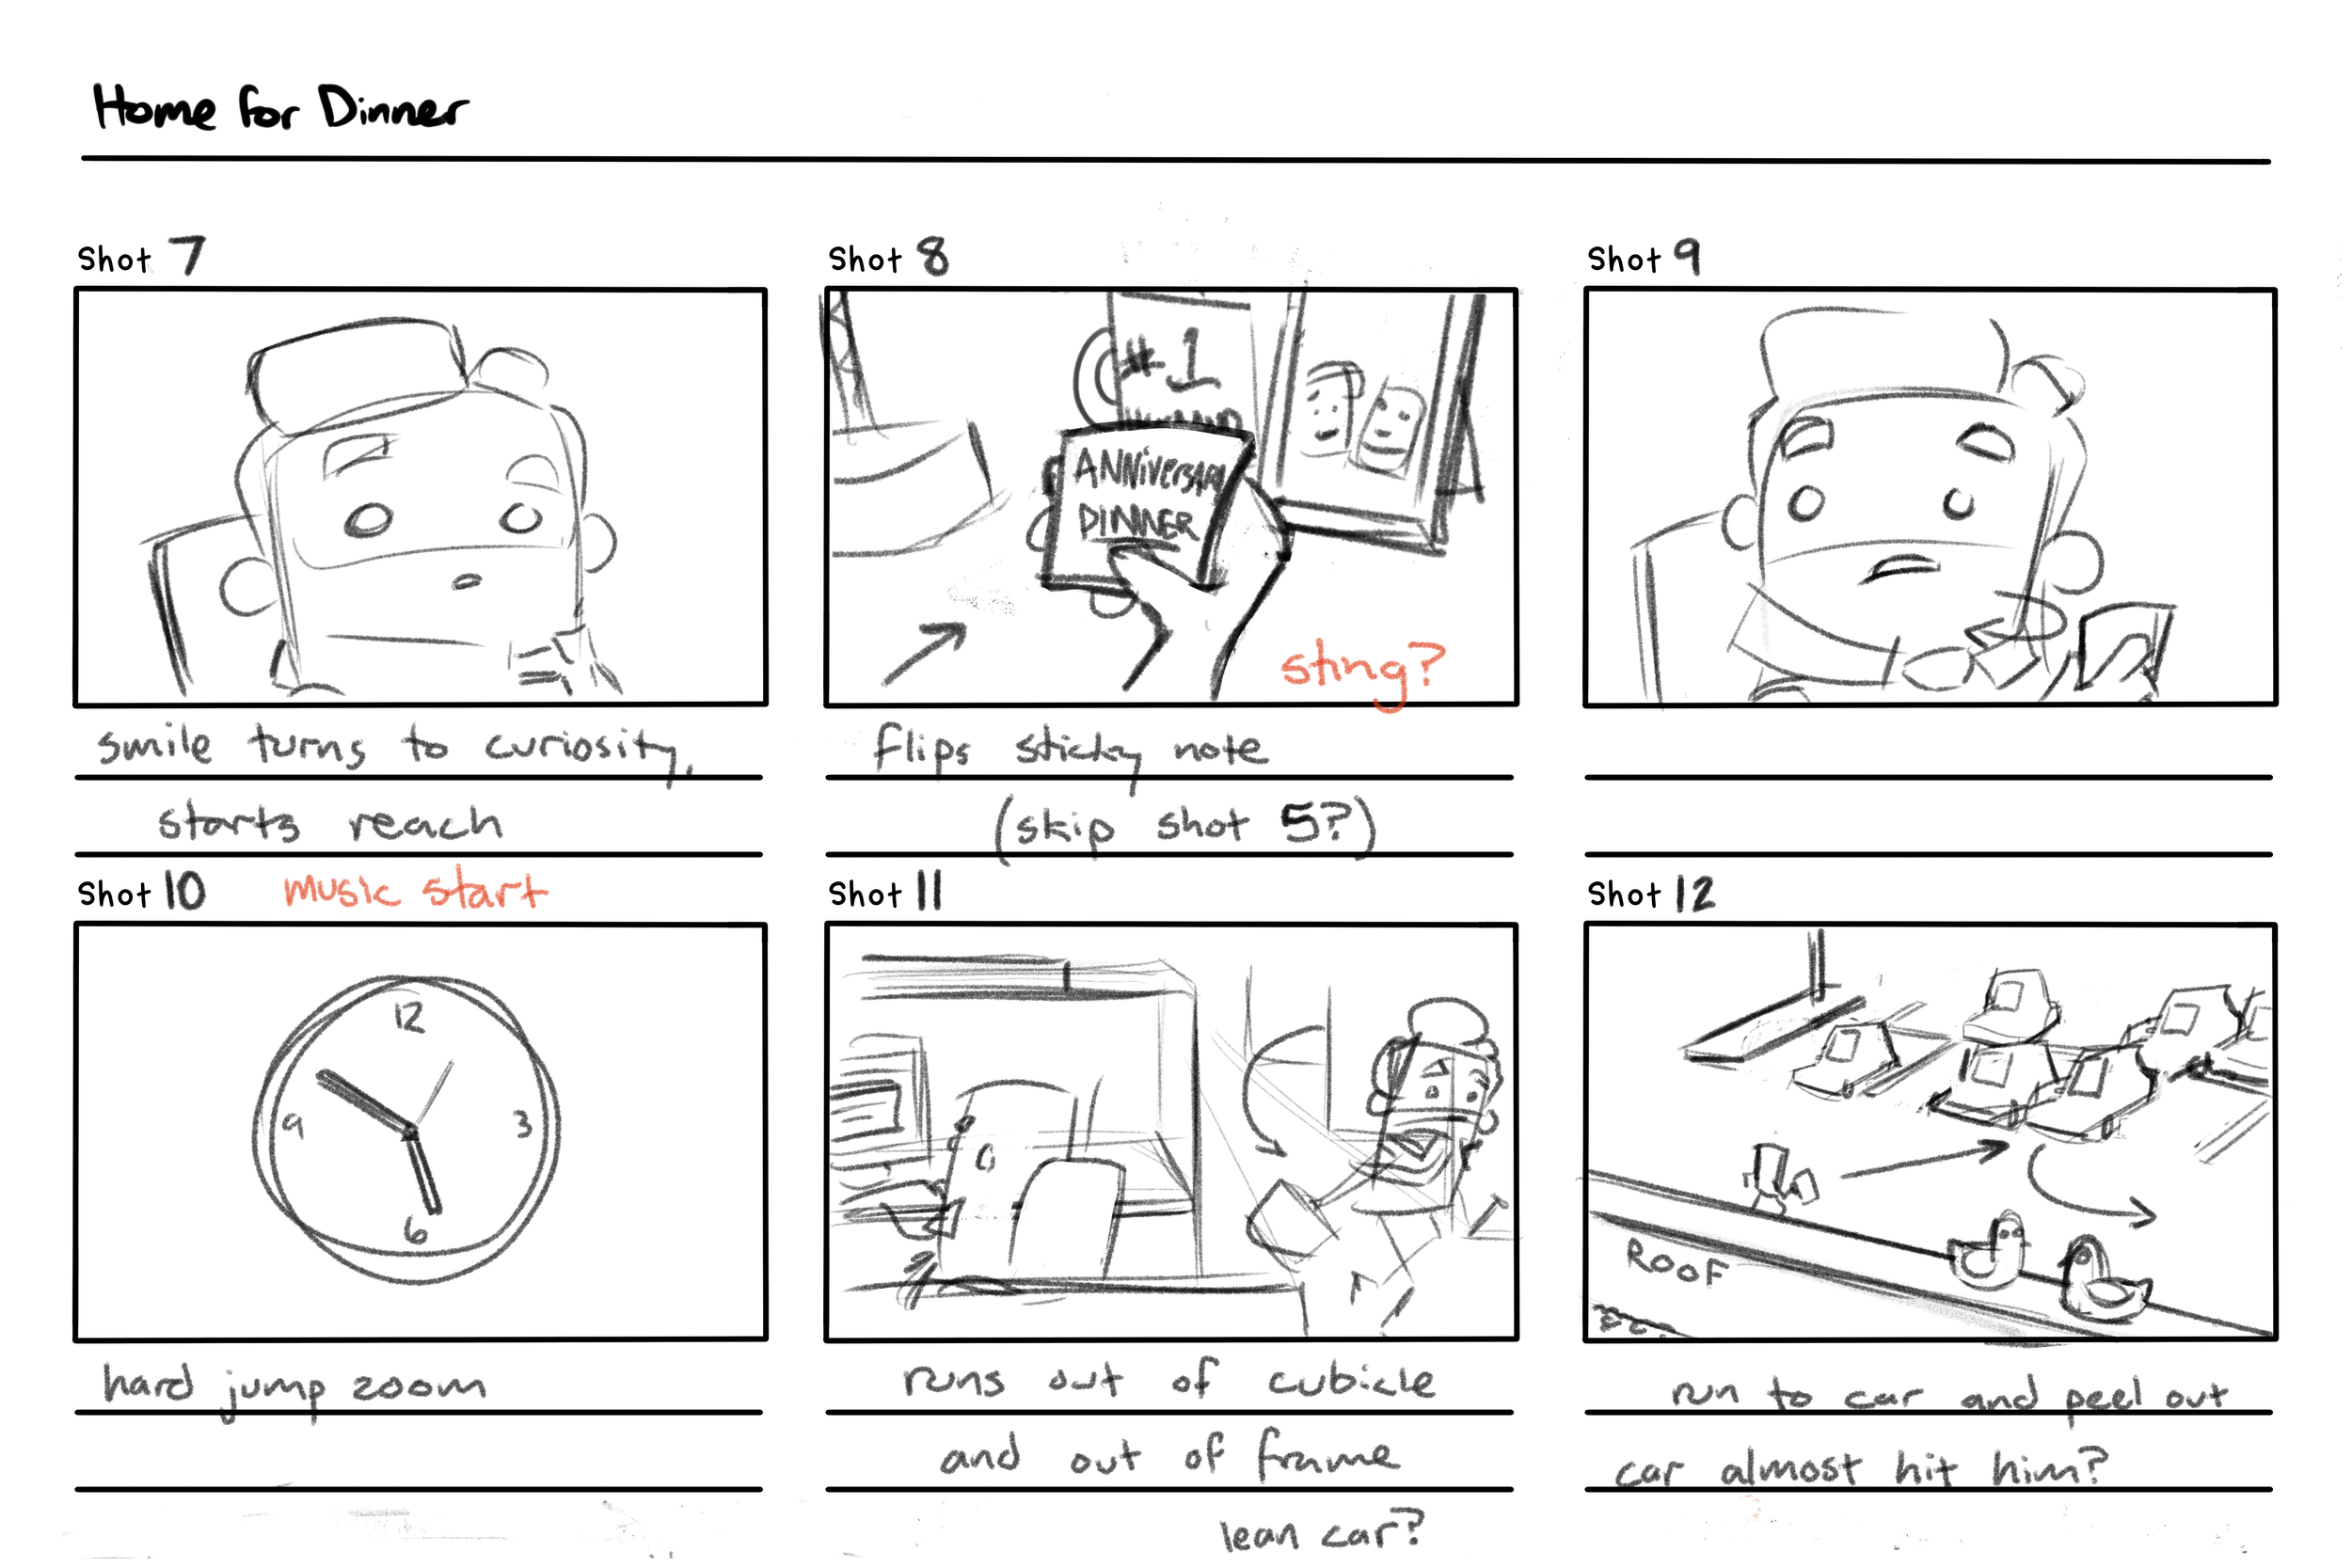 Home_For_Dinner_Storyboard-2.png